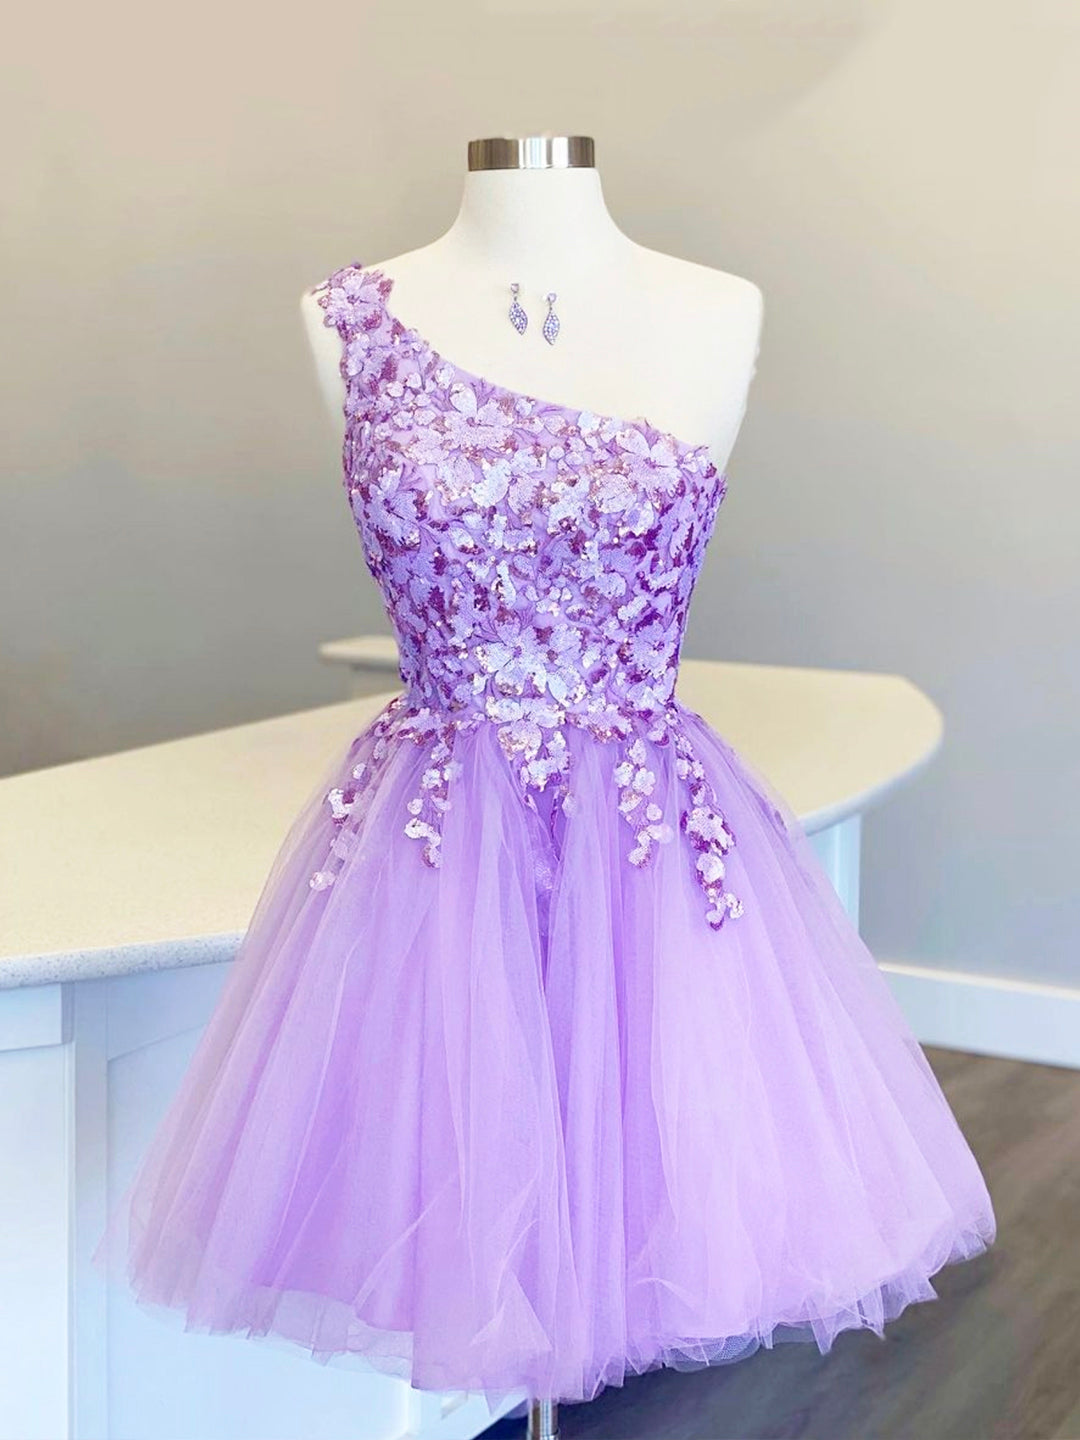 Bridesmaid Dresses With Lace, Cute Tulle Sequins Short Prom Dress, Purple One Shoulder Party Dress